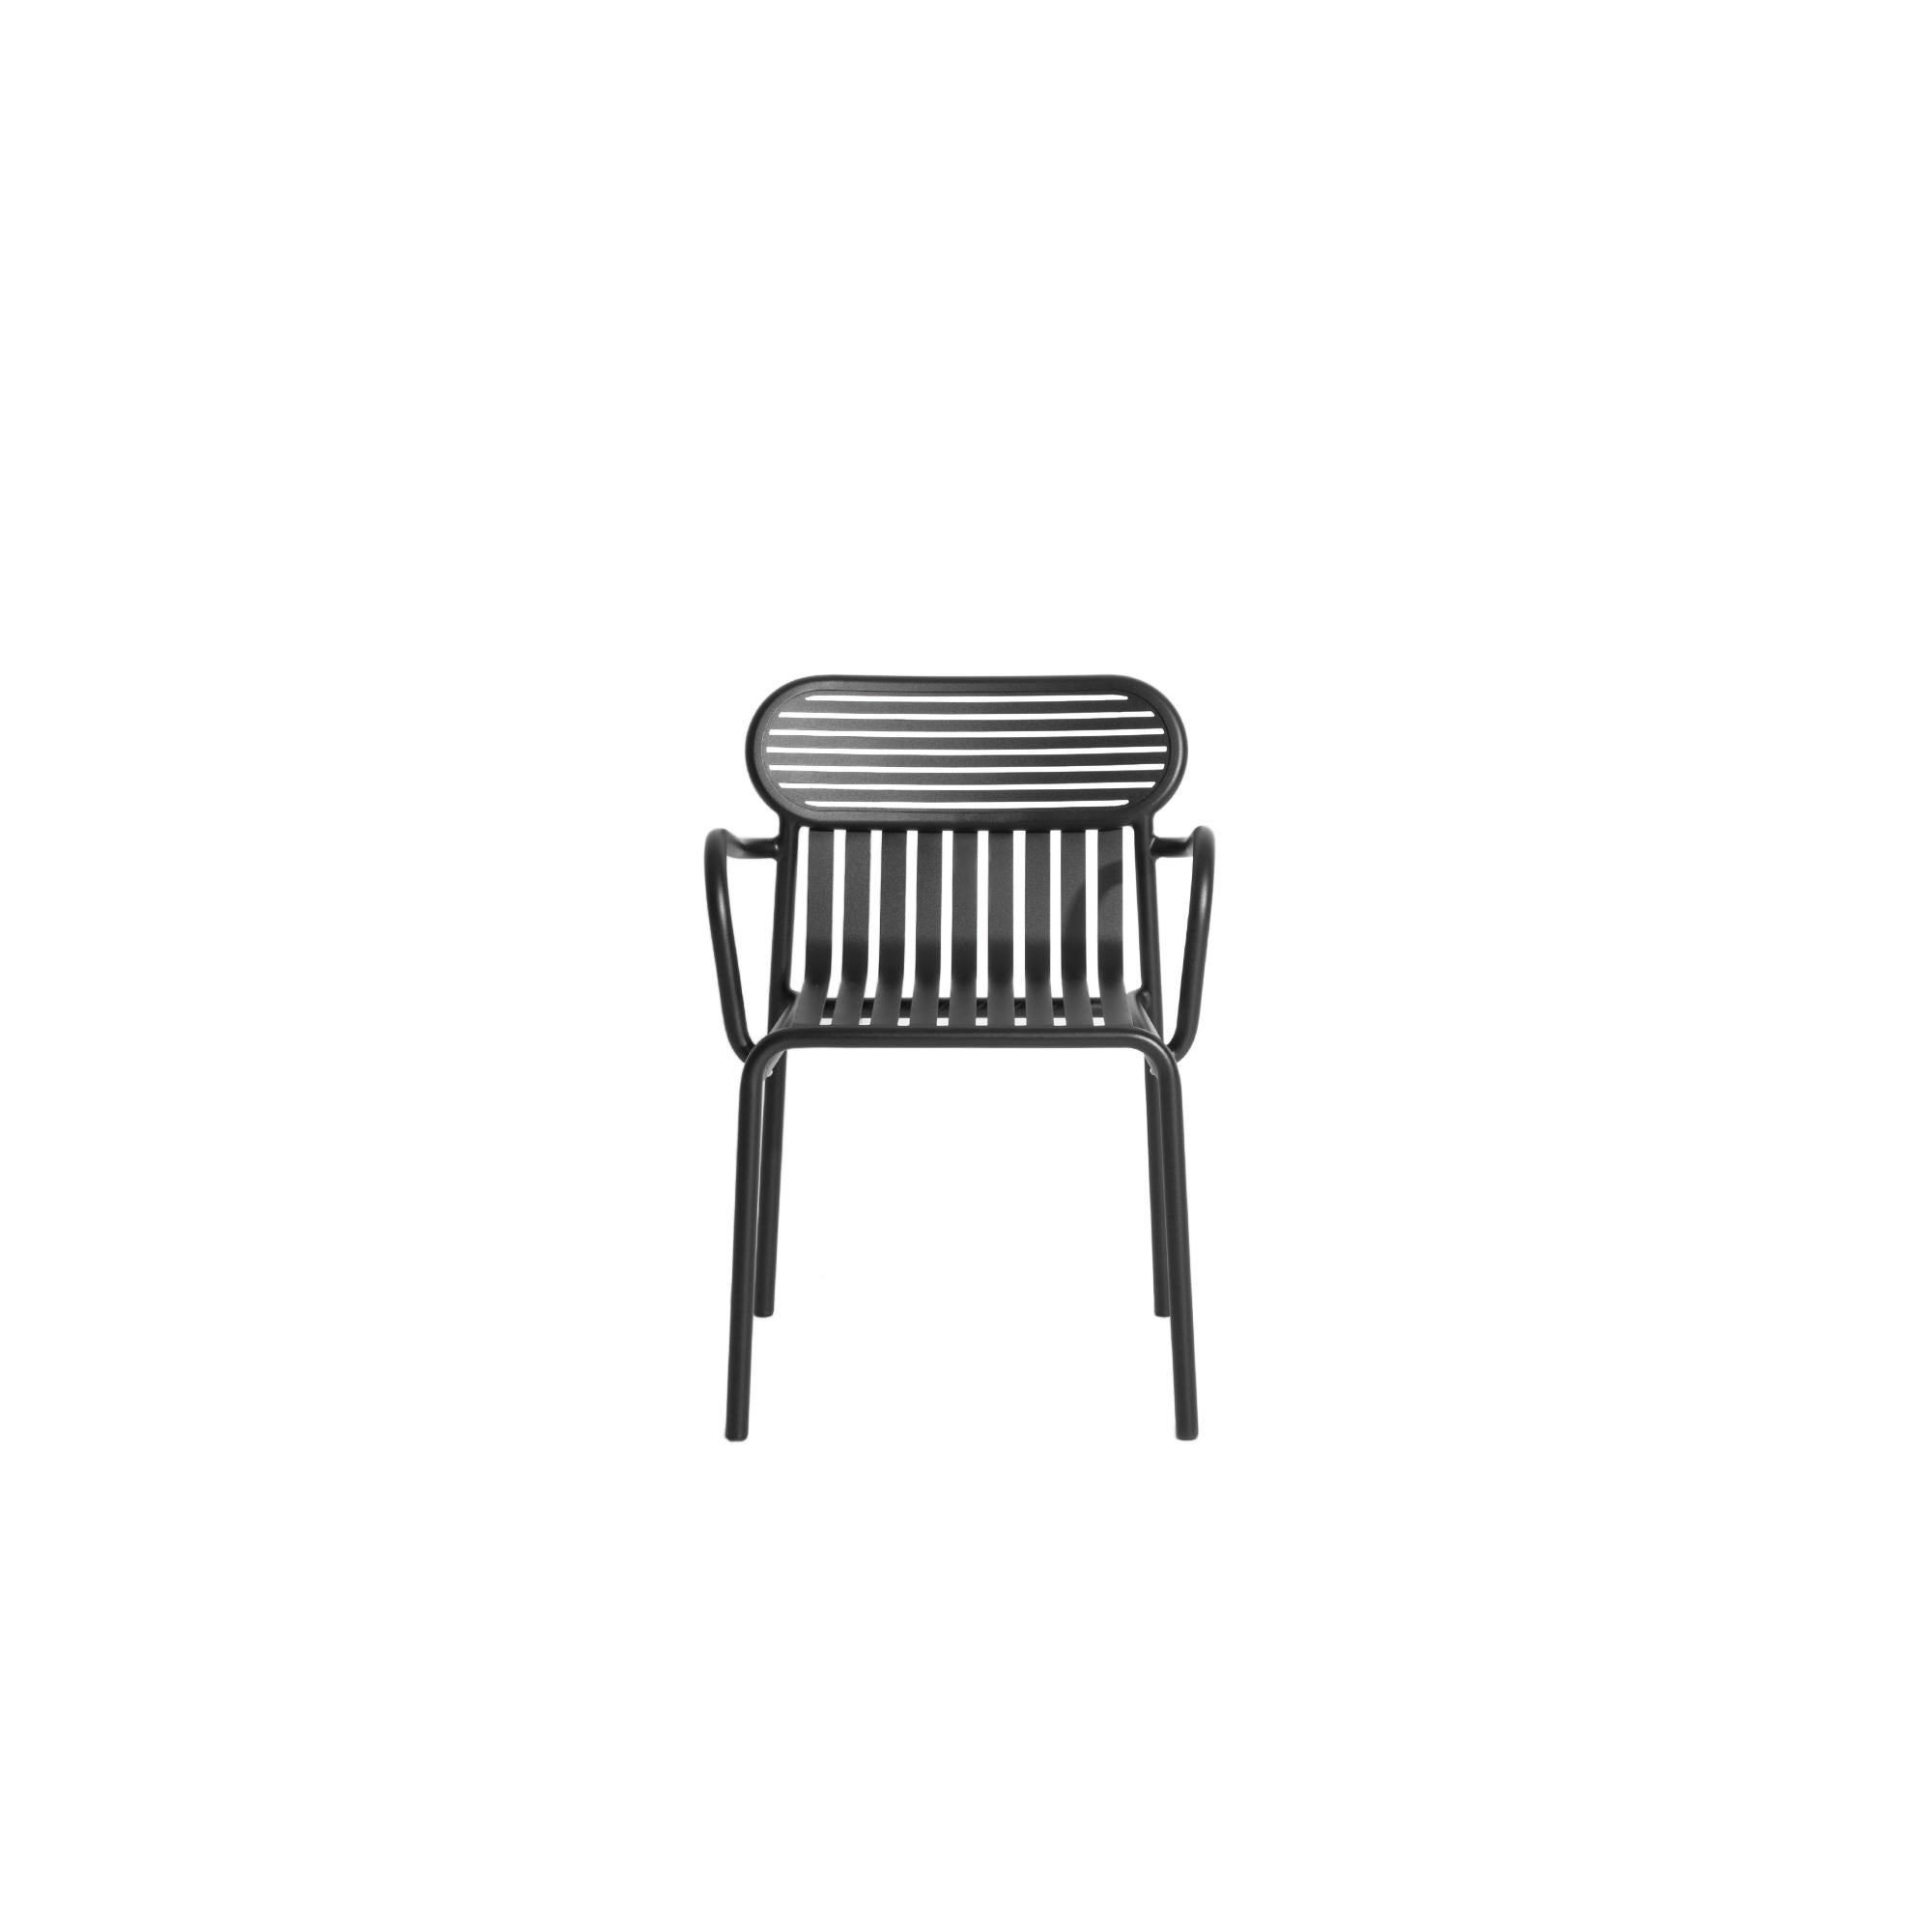 Petite Friture Week-End Bridge Chair in Black Aluminium by Studio BrichetZiegler, 2017

The week-end collection is a full range of outdoor furniture, in aluminium grained epoxy paint, matt finish, that includes 18 functions and 8 colours for the